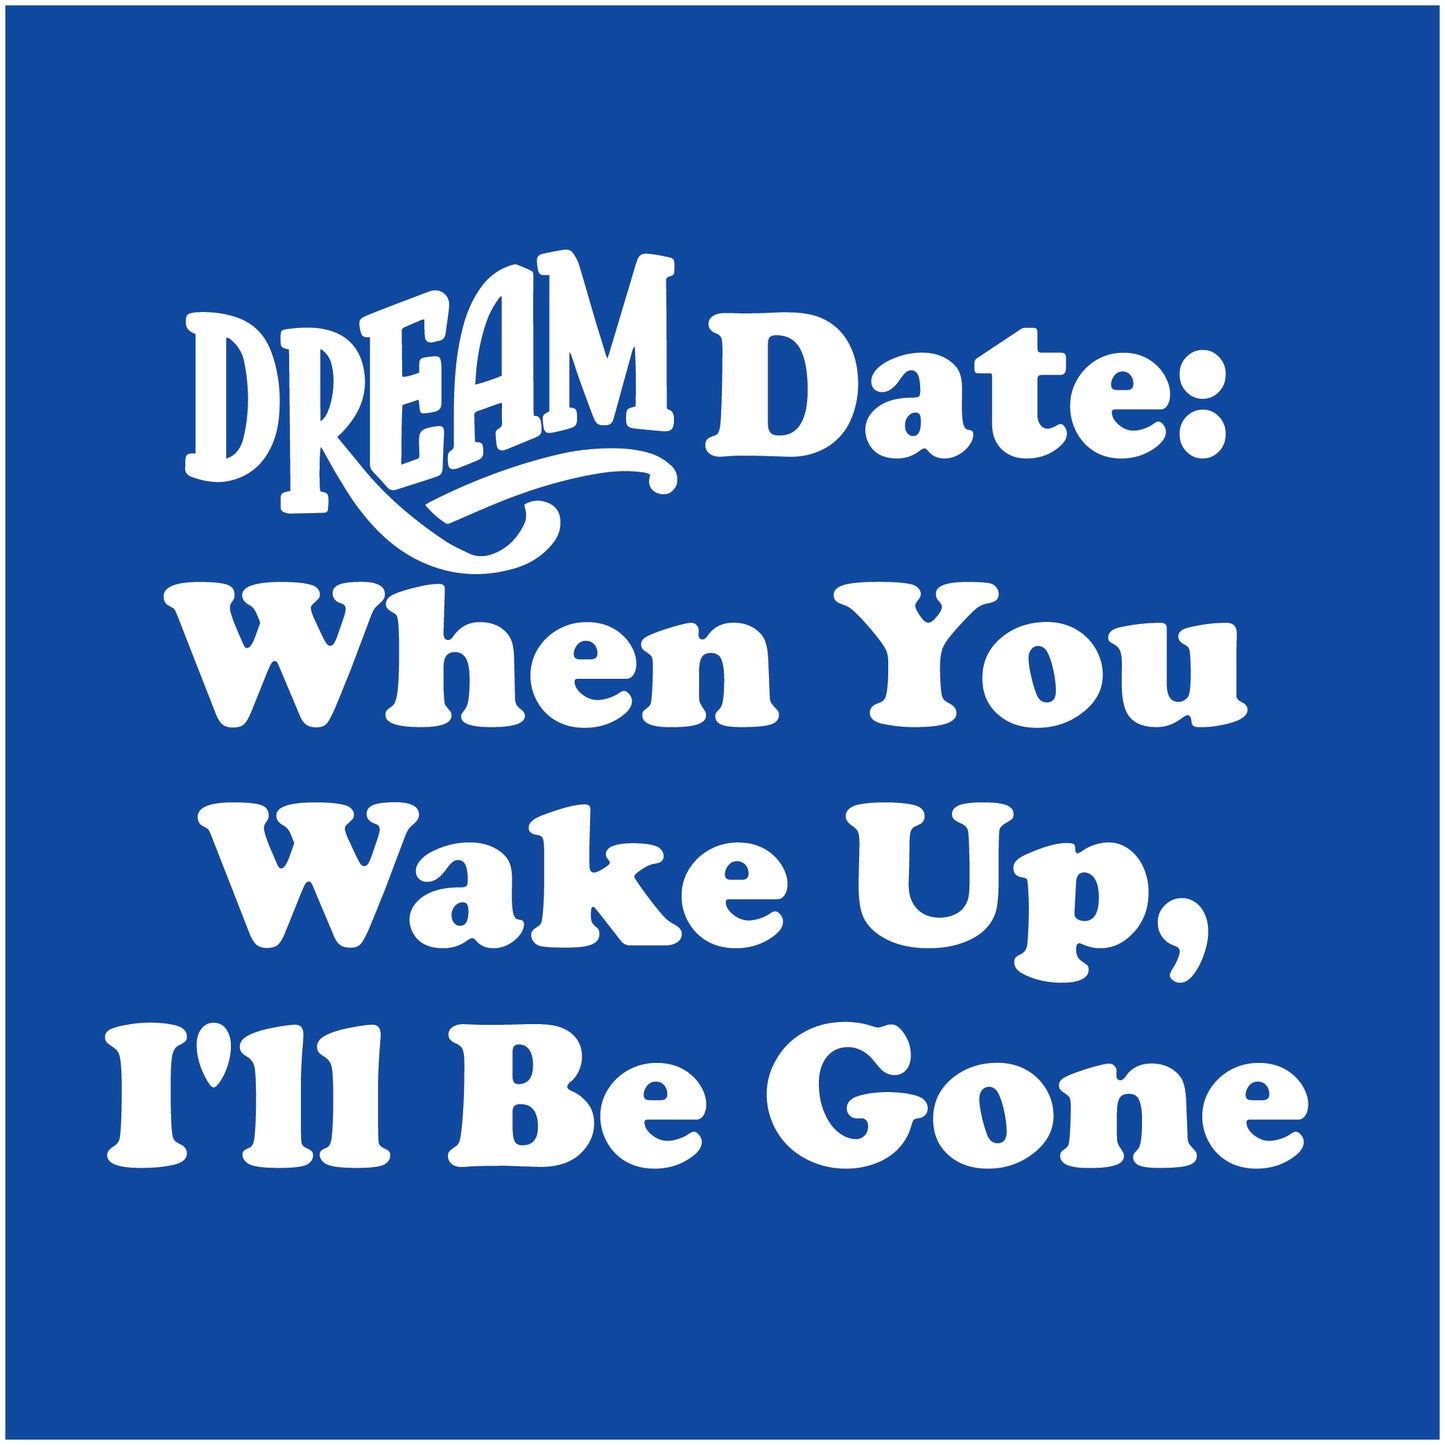 Dream Date, When You Wake Up, I'll Be Gone